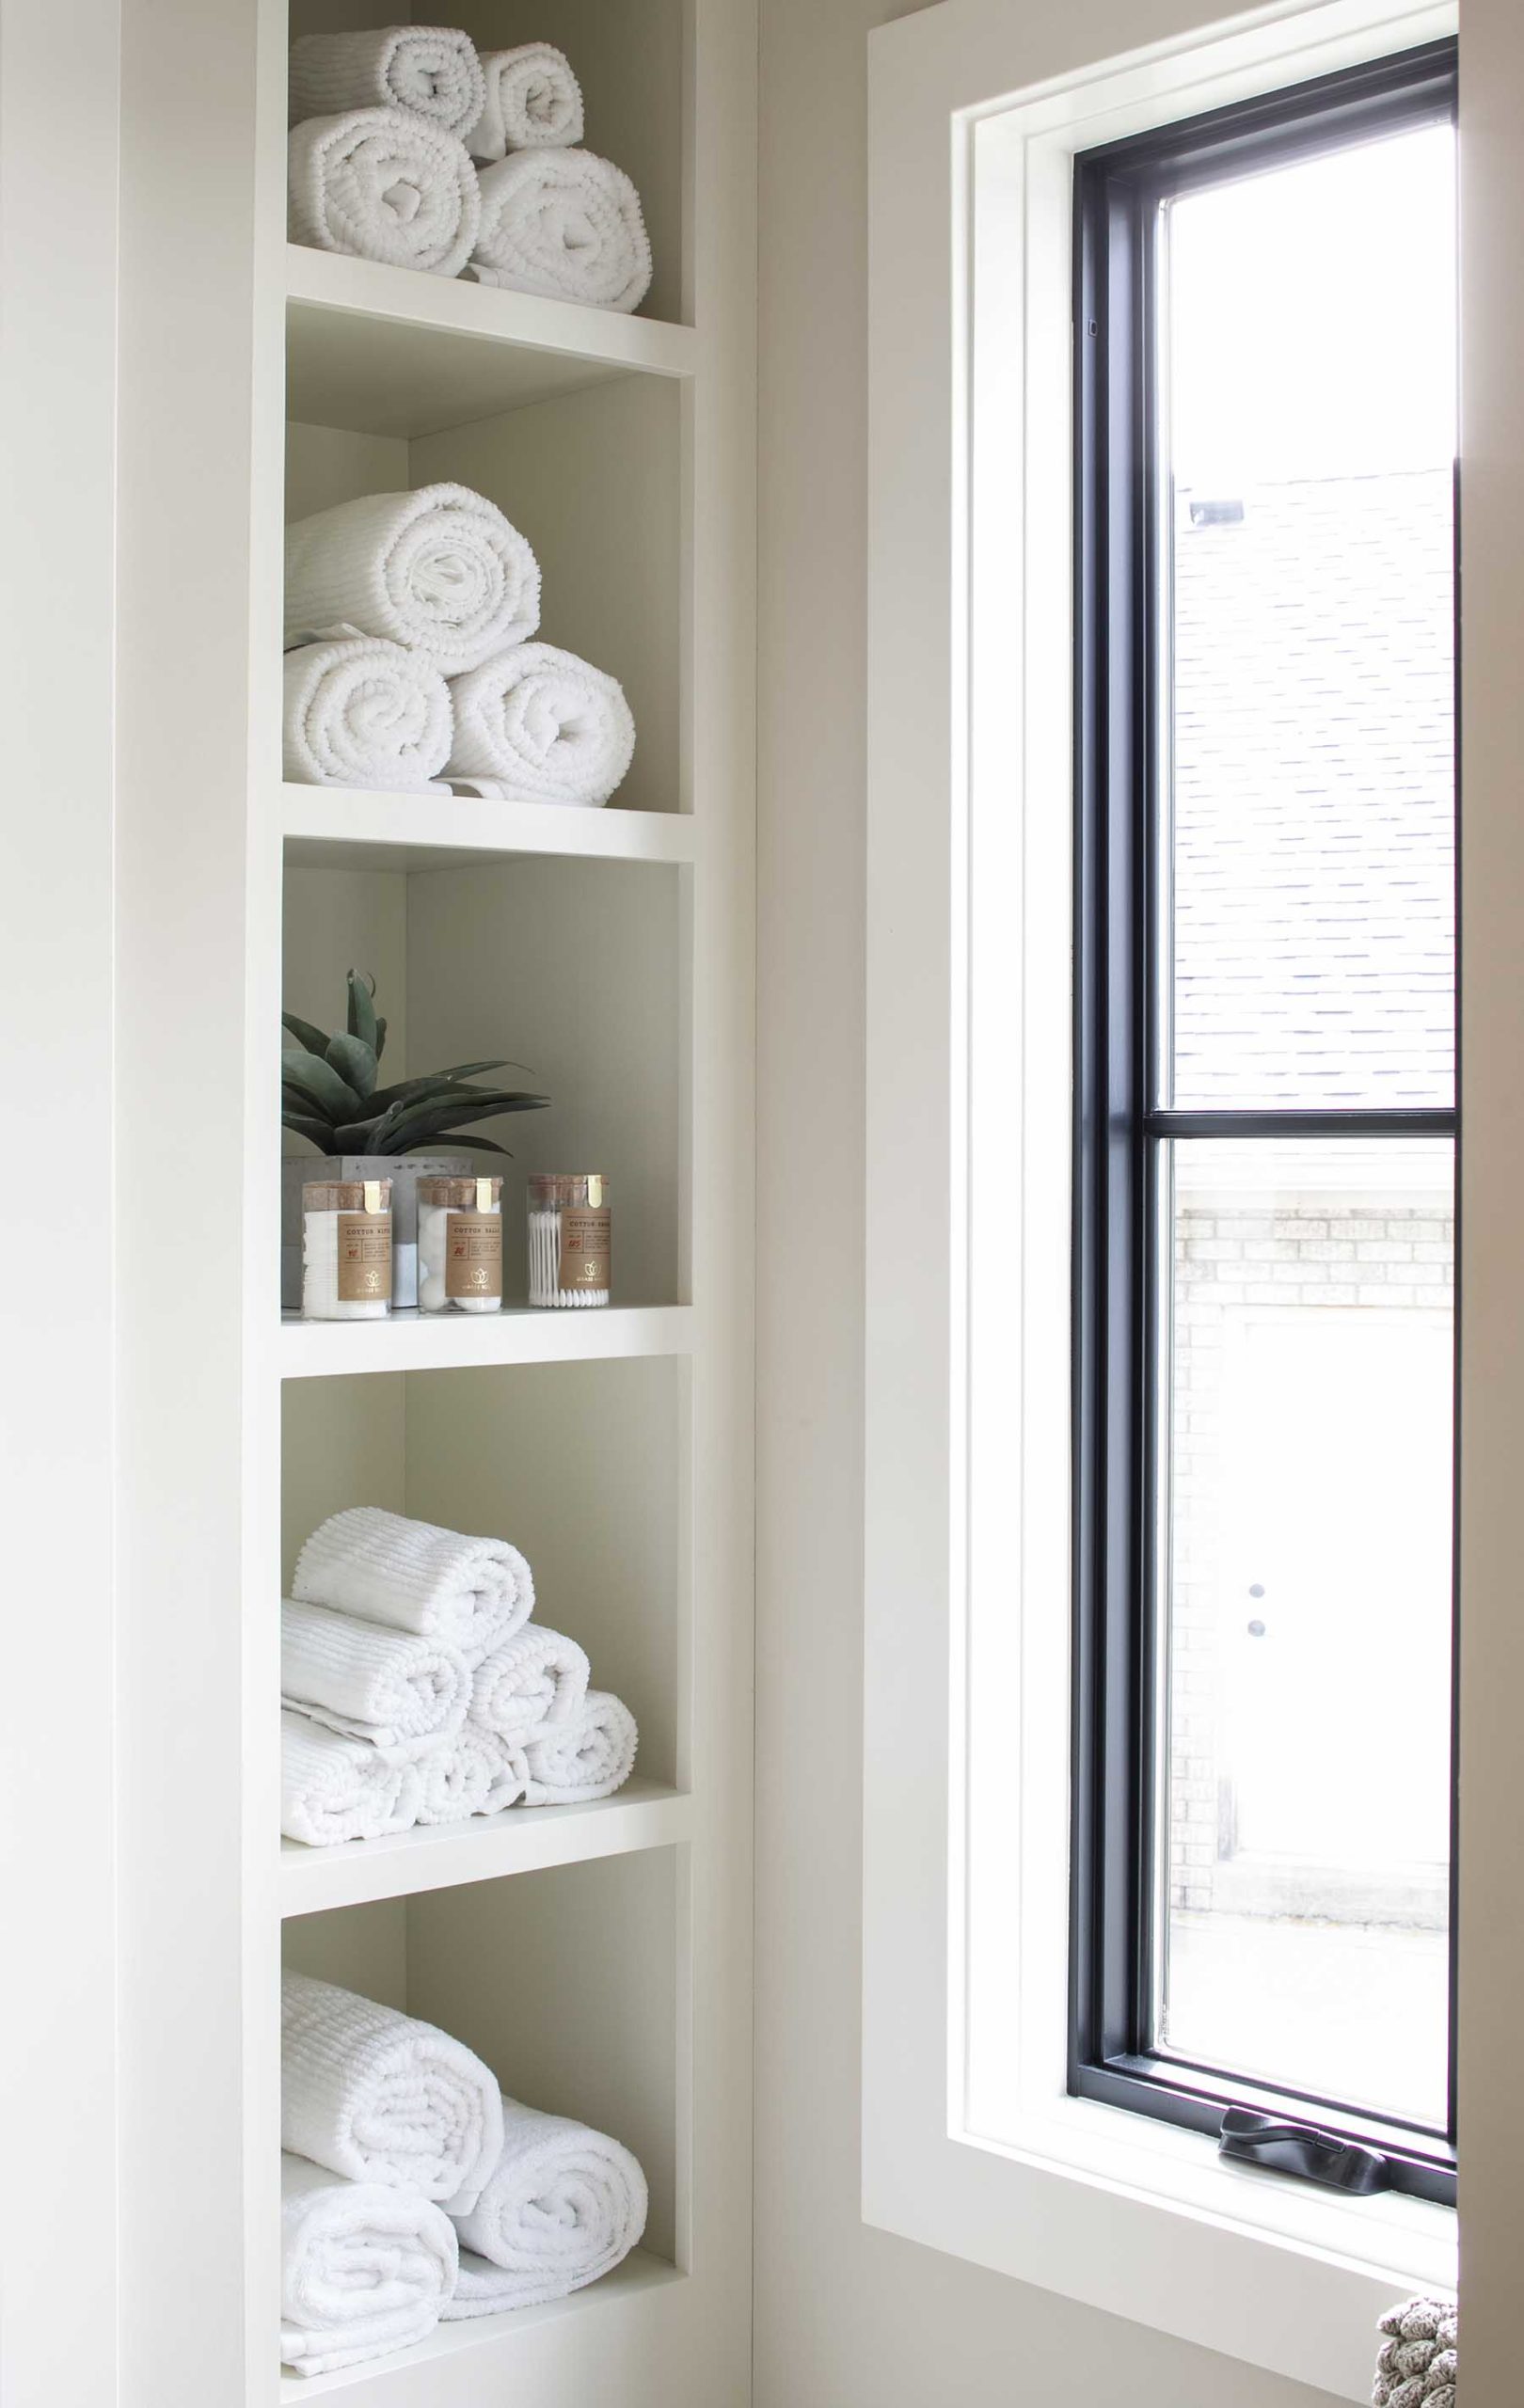 A bathroom with a shelf full of towels next to a window.